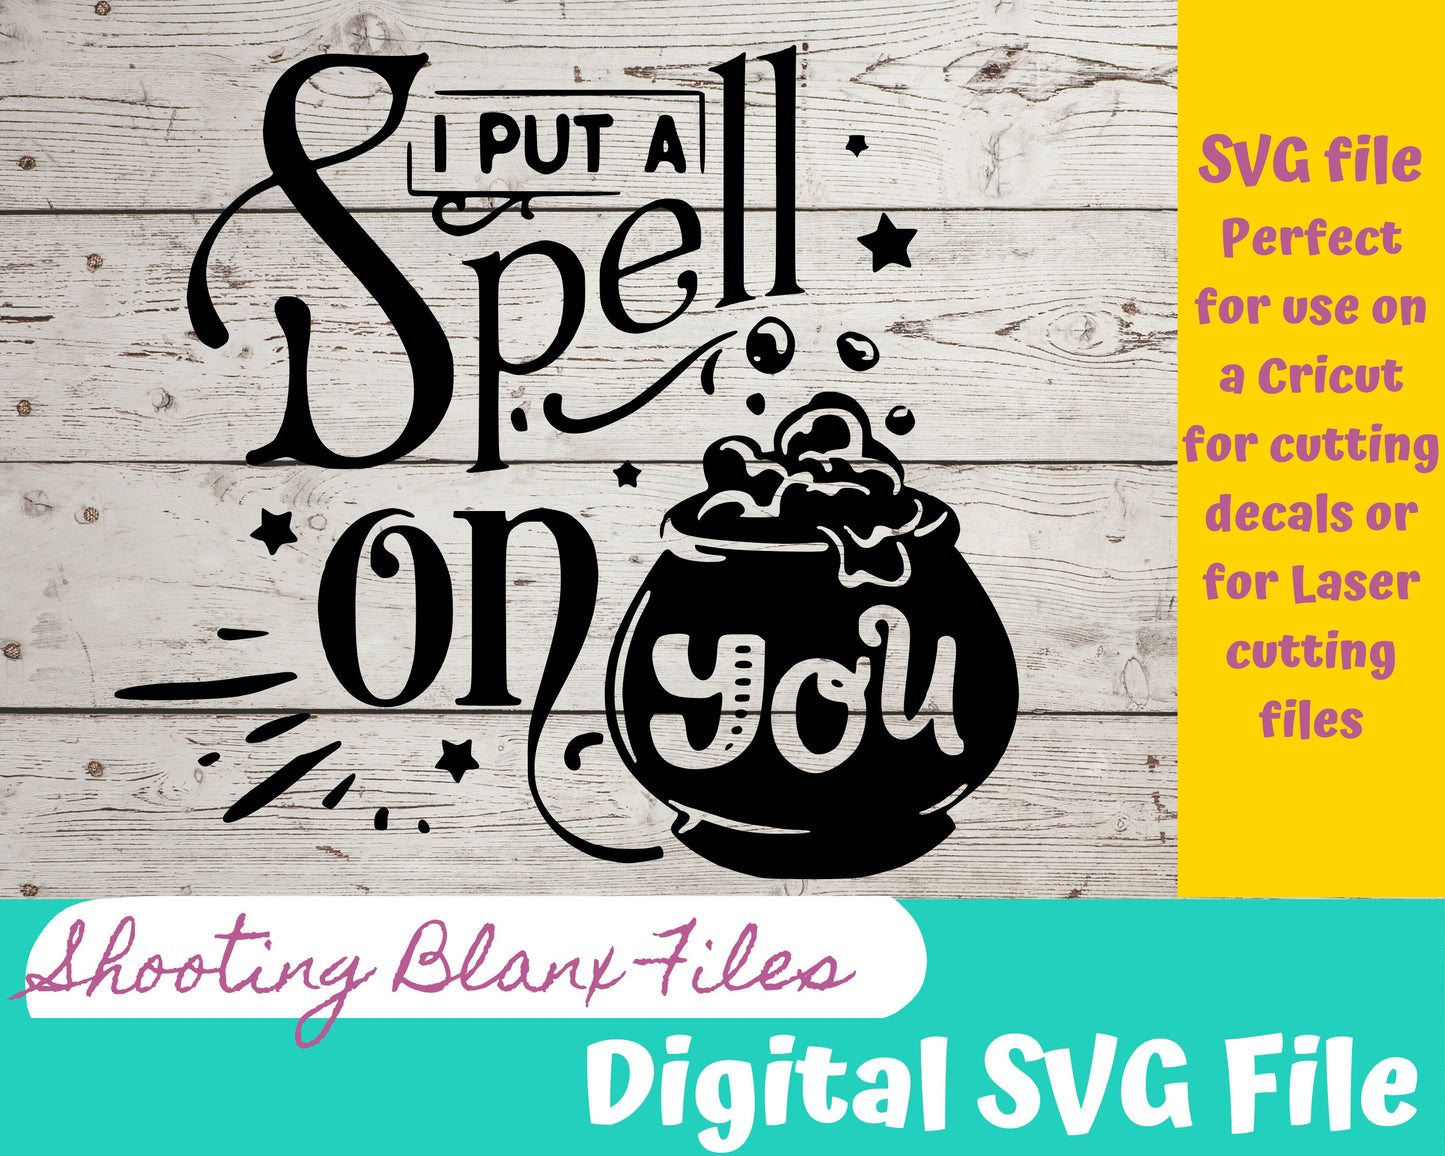 I put a spell on you SVG file for Cricut - laser engraving Glowforge, Scary, Halloween, Minimalistic, Halloween, Horror, phrase, saying